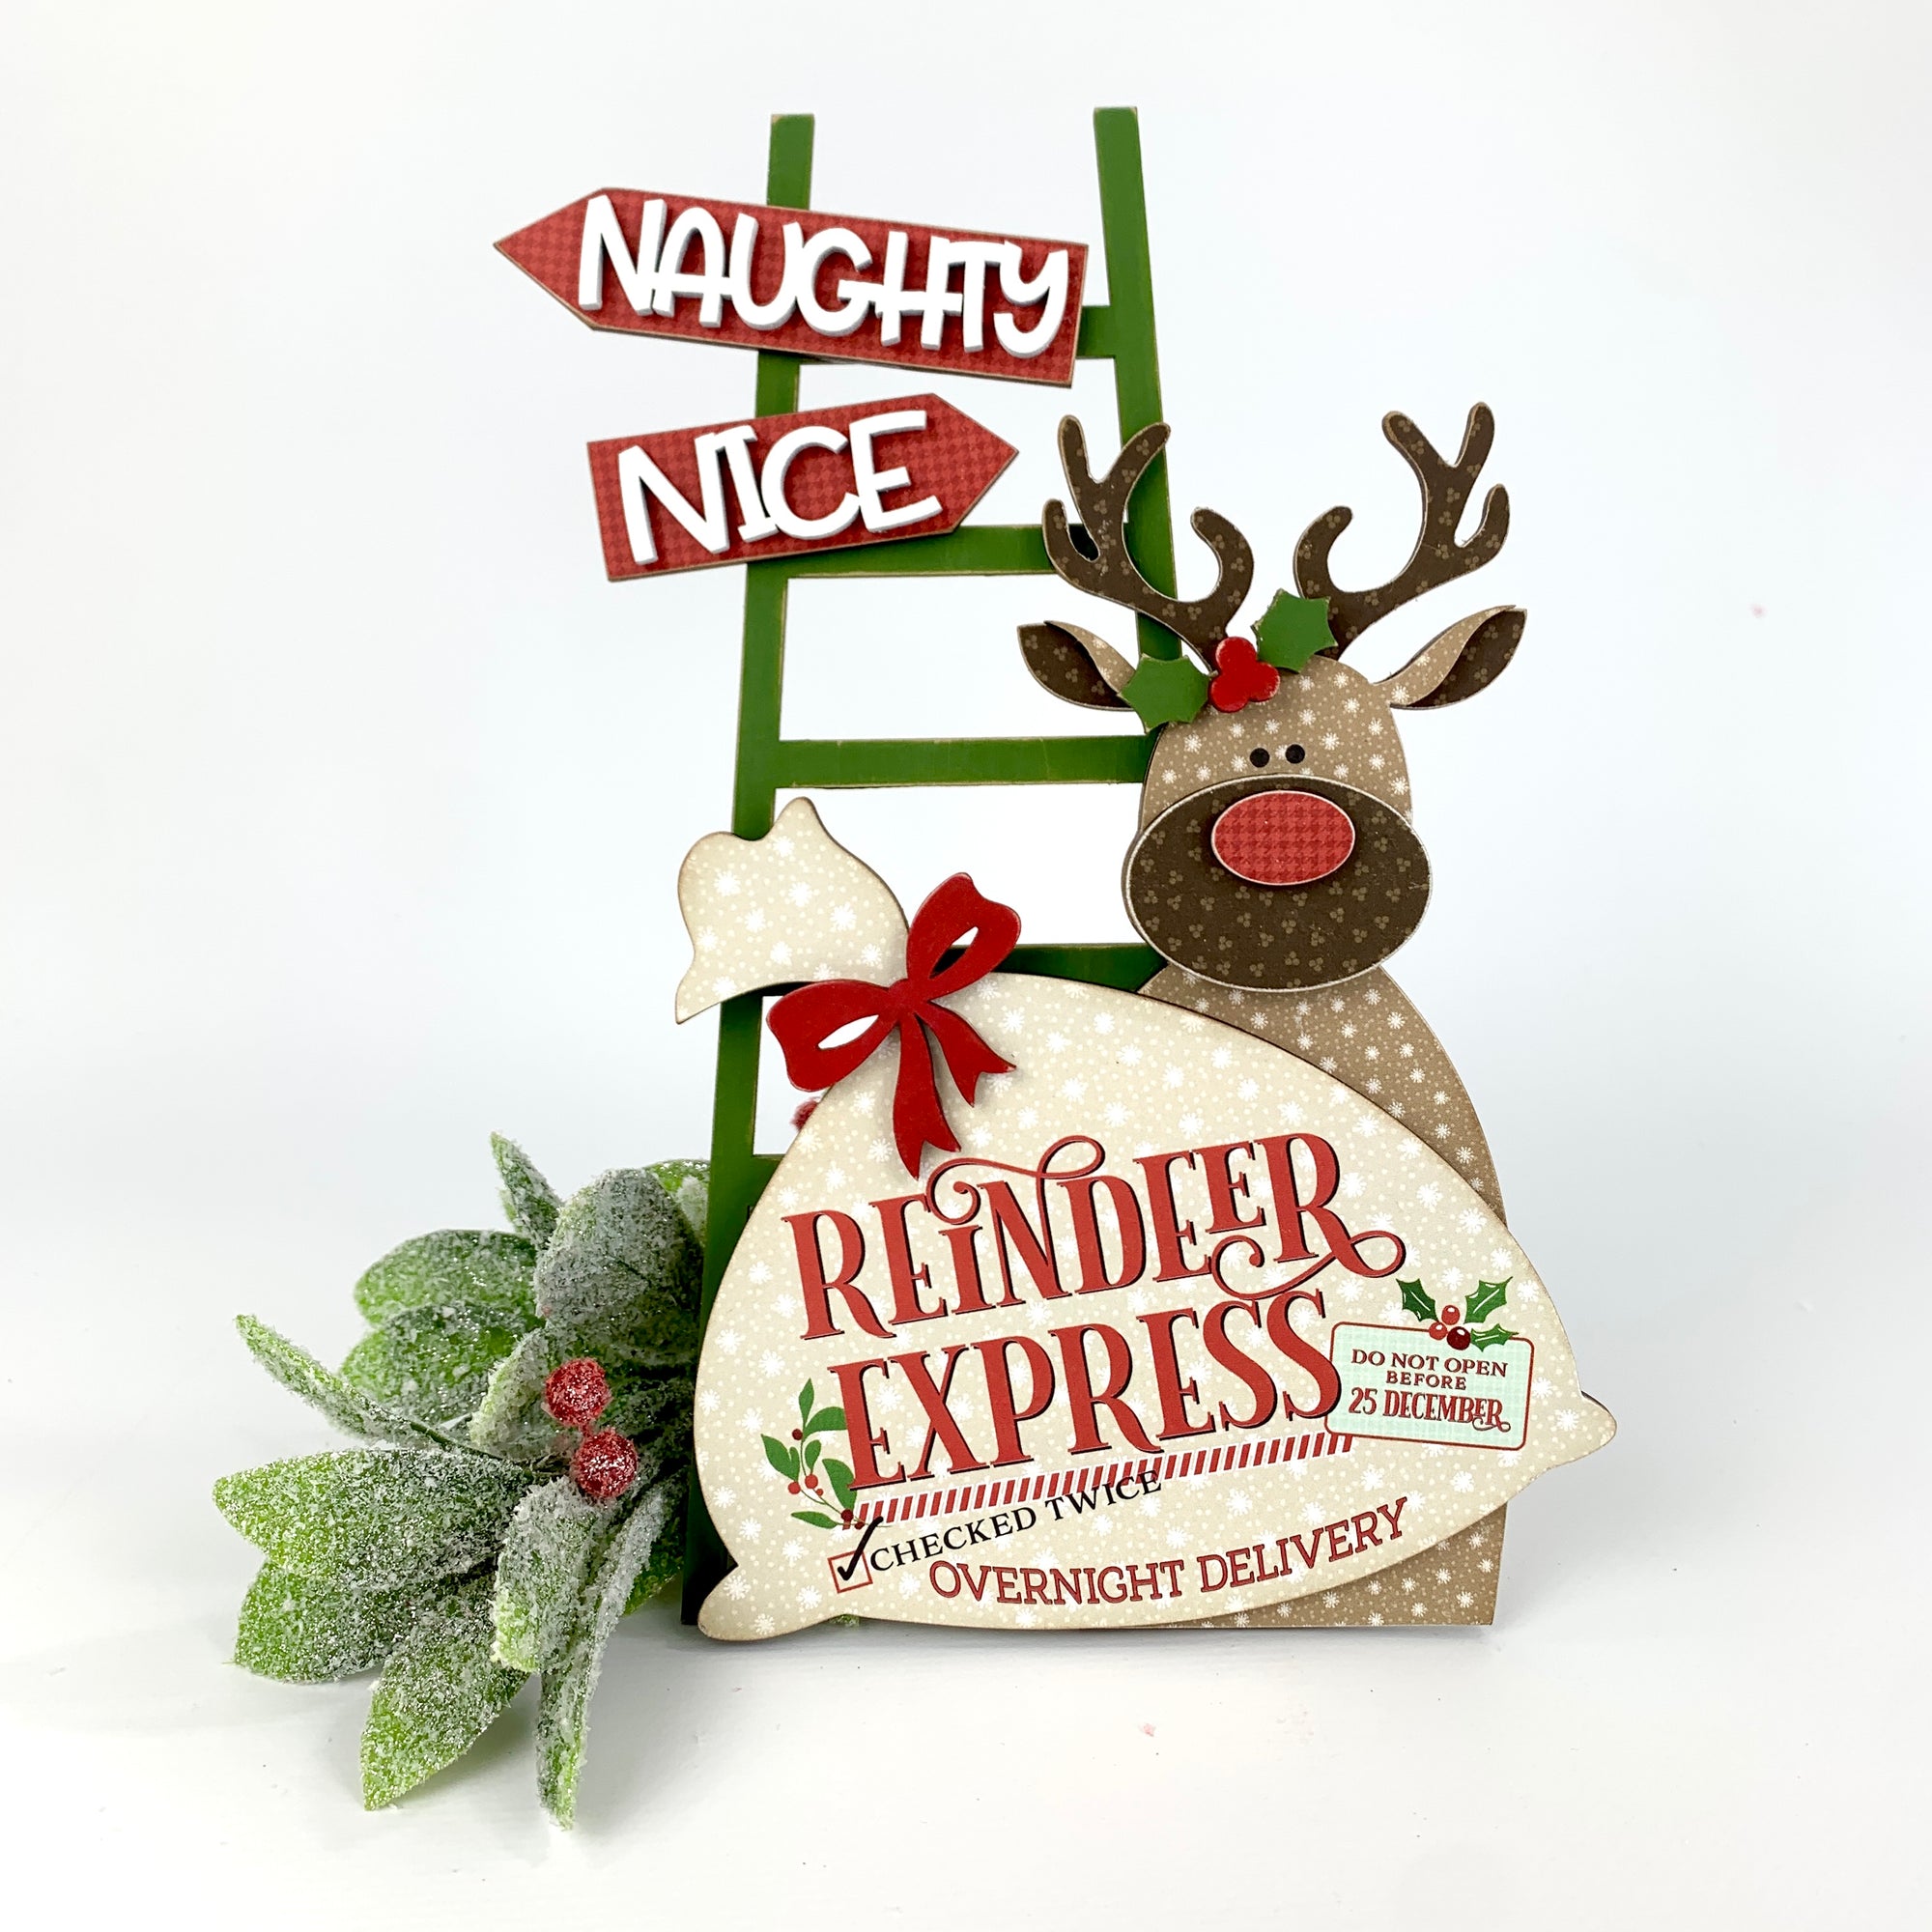 Ladder for Christmas teired tray with a reindeer holding a Santa Express mail bag. Ladder has naughty or nice signs. Christmas reindeer tiered tray or decorative tray wood decor craft kit